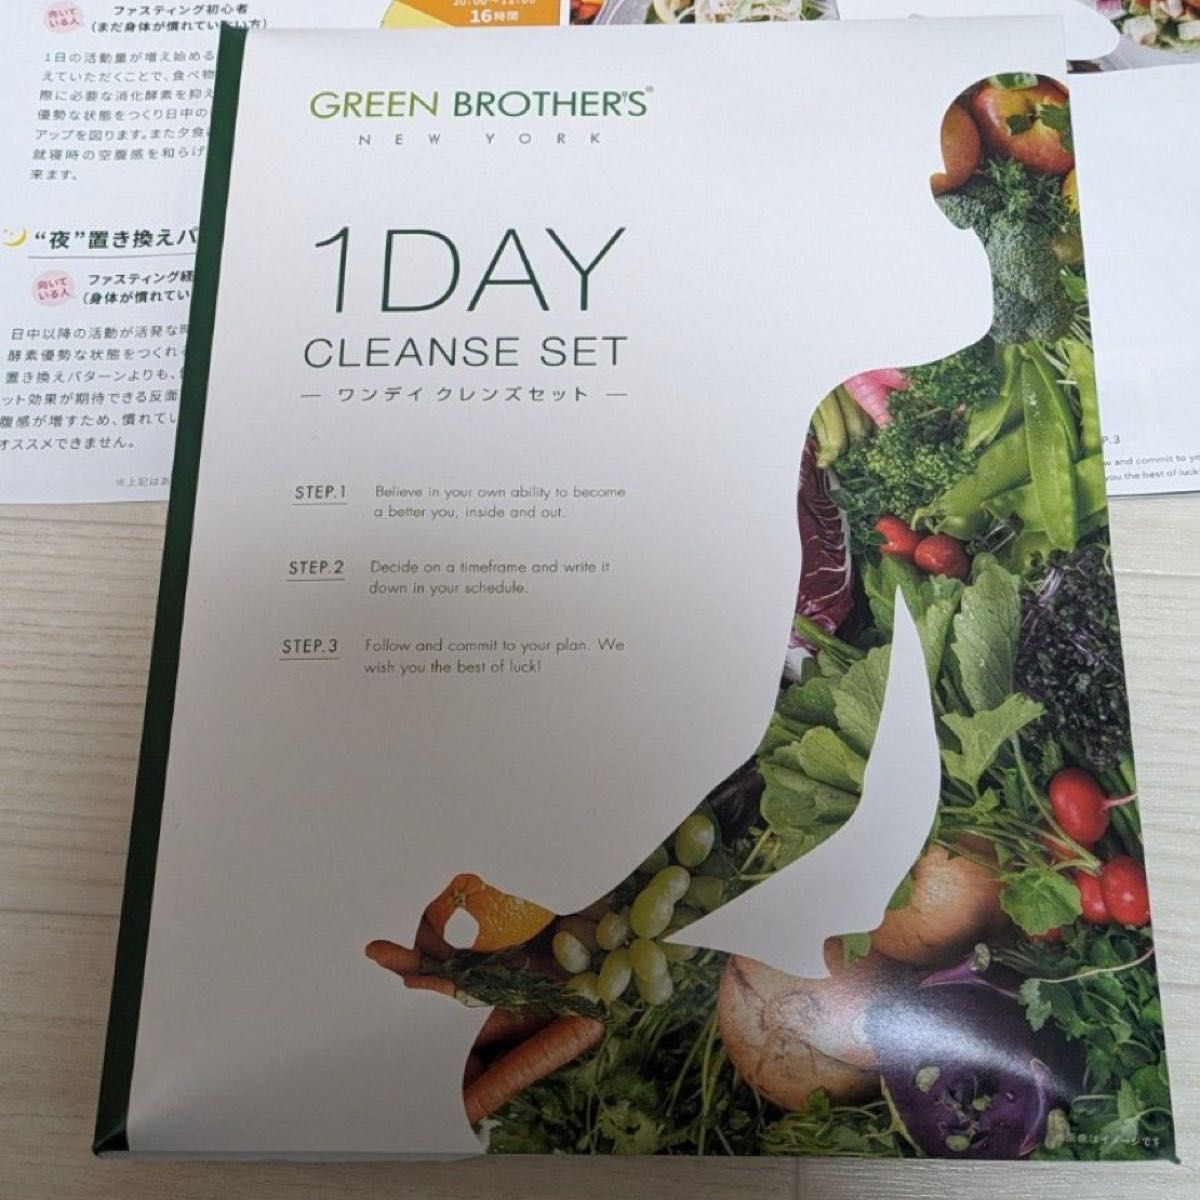 GREEN BROTHERS GB1DAY CLEANSE SET ワンデイクレンズ セット1週間分 1箱 ダイエット